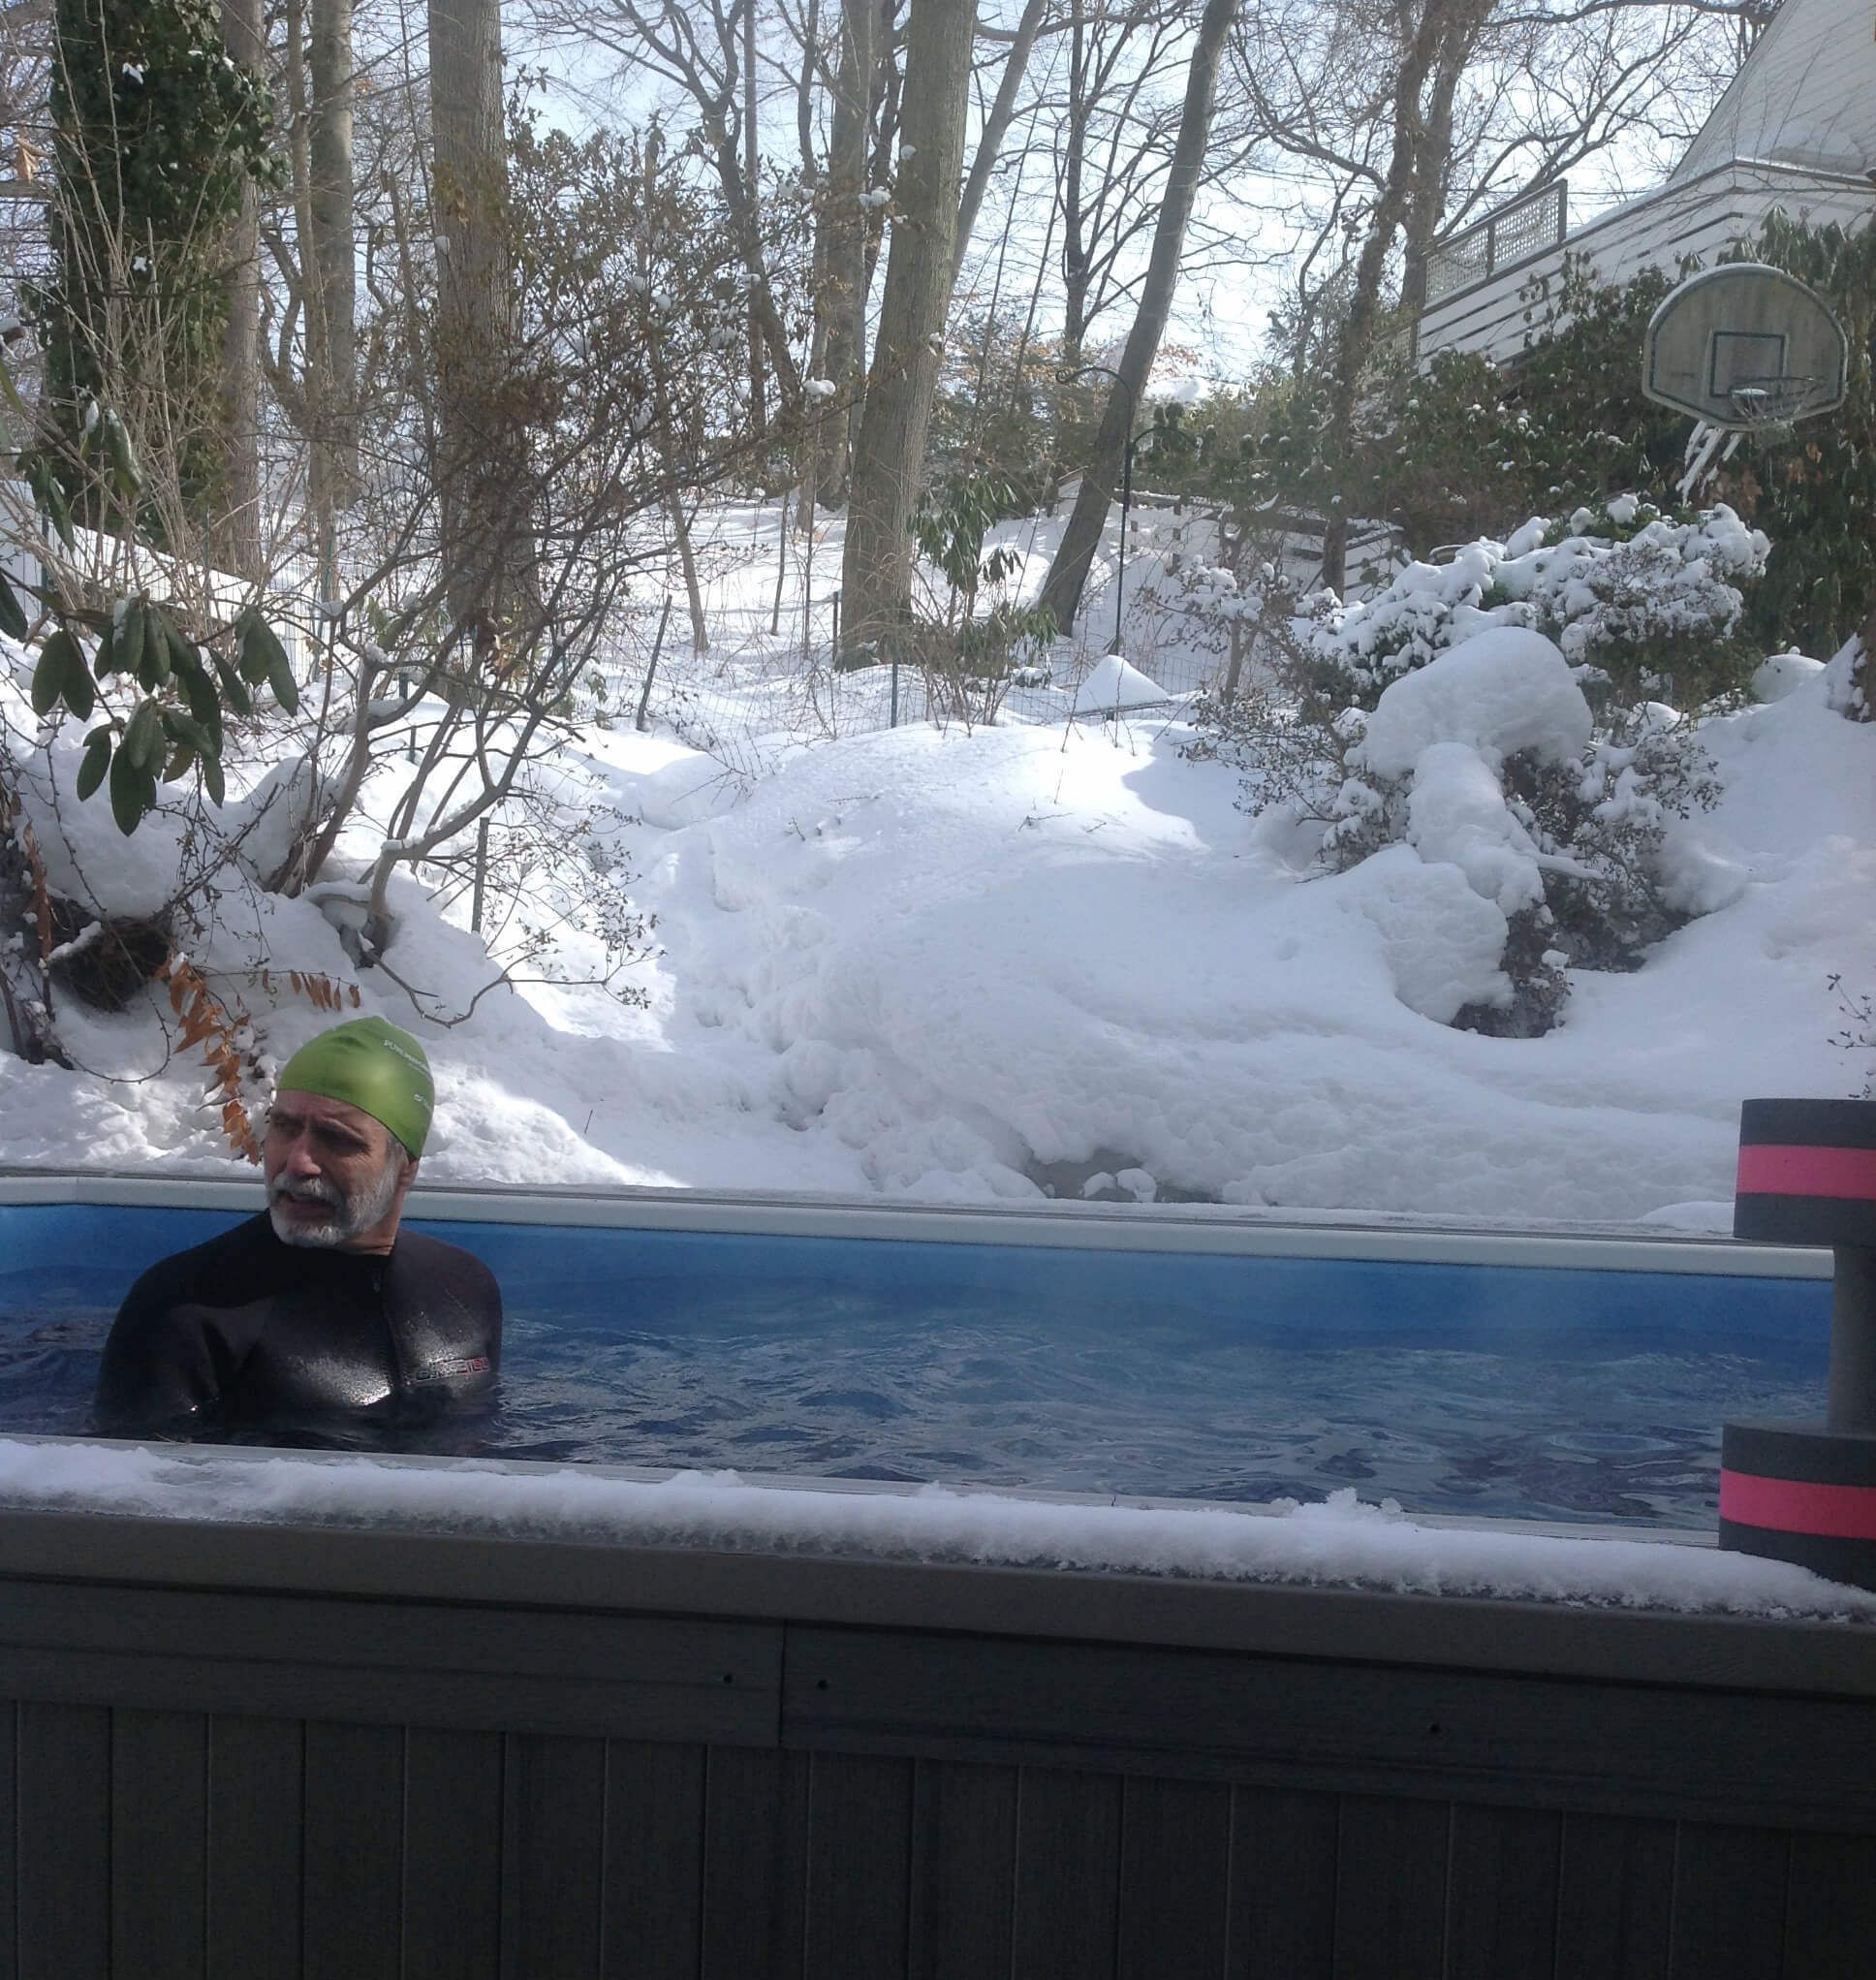 A picture of a man in a wetsuit and swim cap standing in an outdoor pool in the snow.